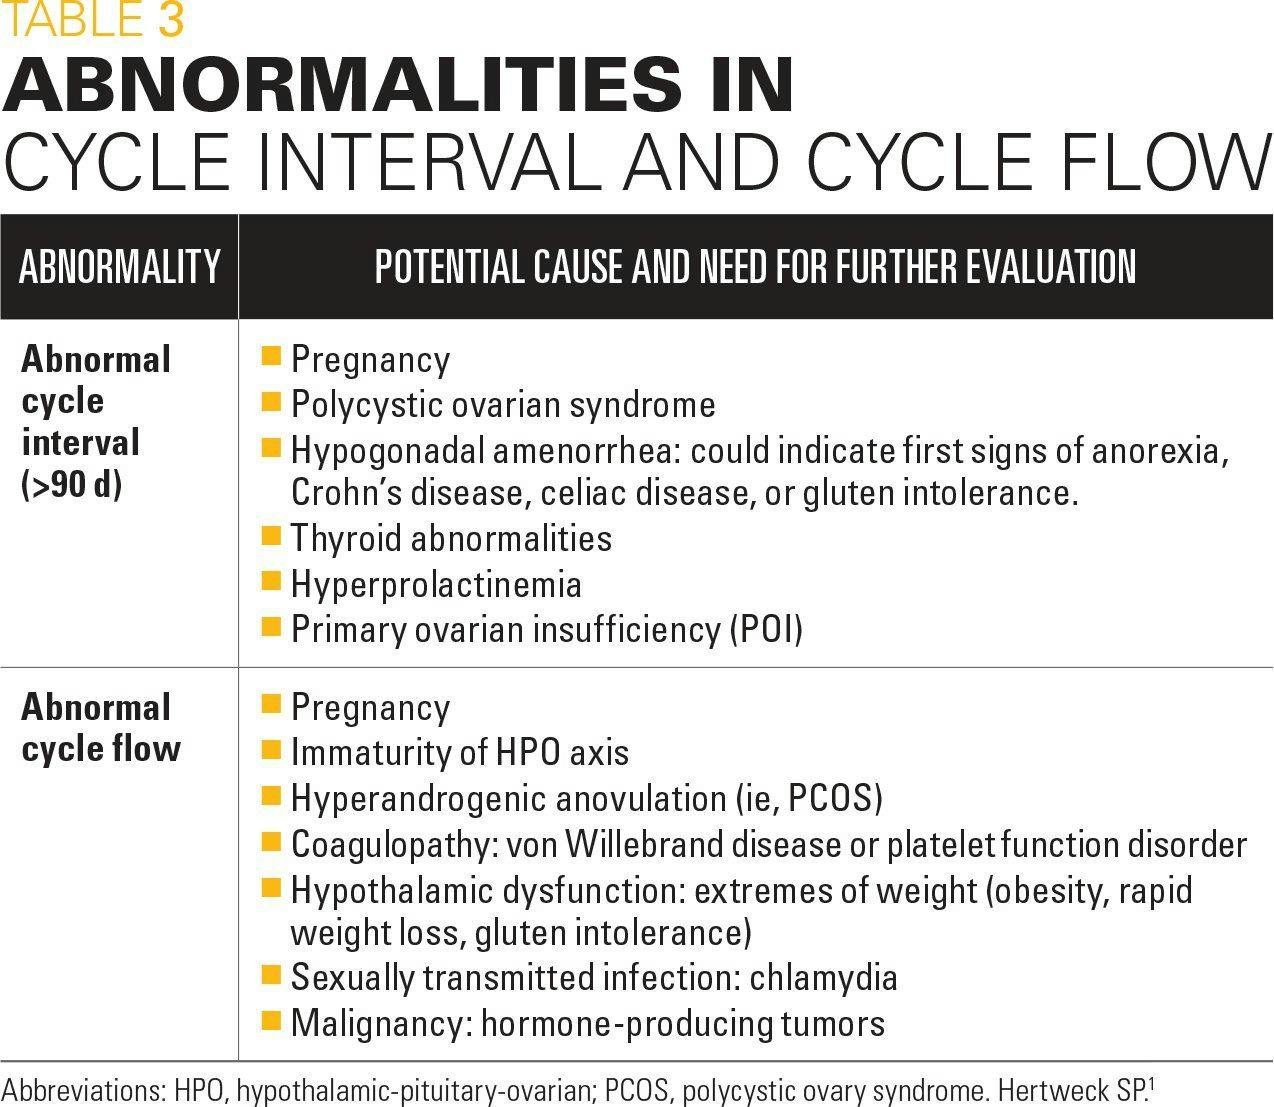 Abnormalities in cycle interval and cycle flow